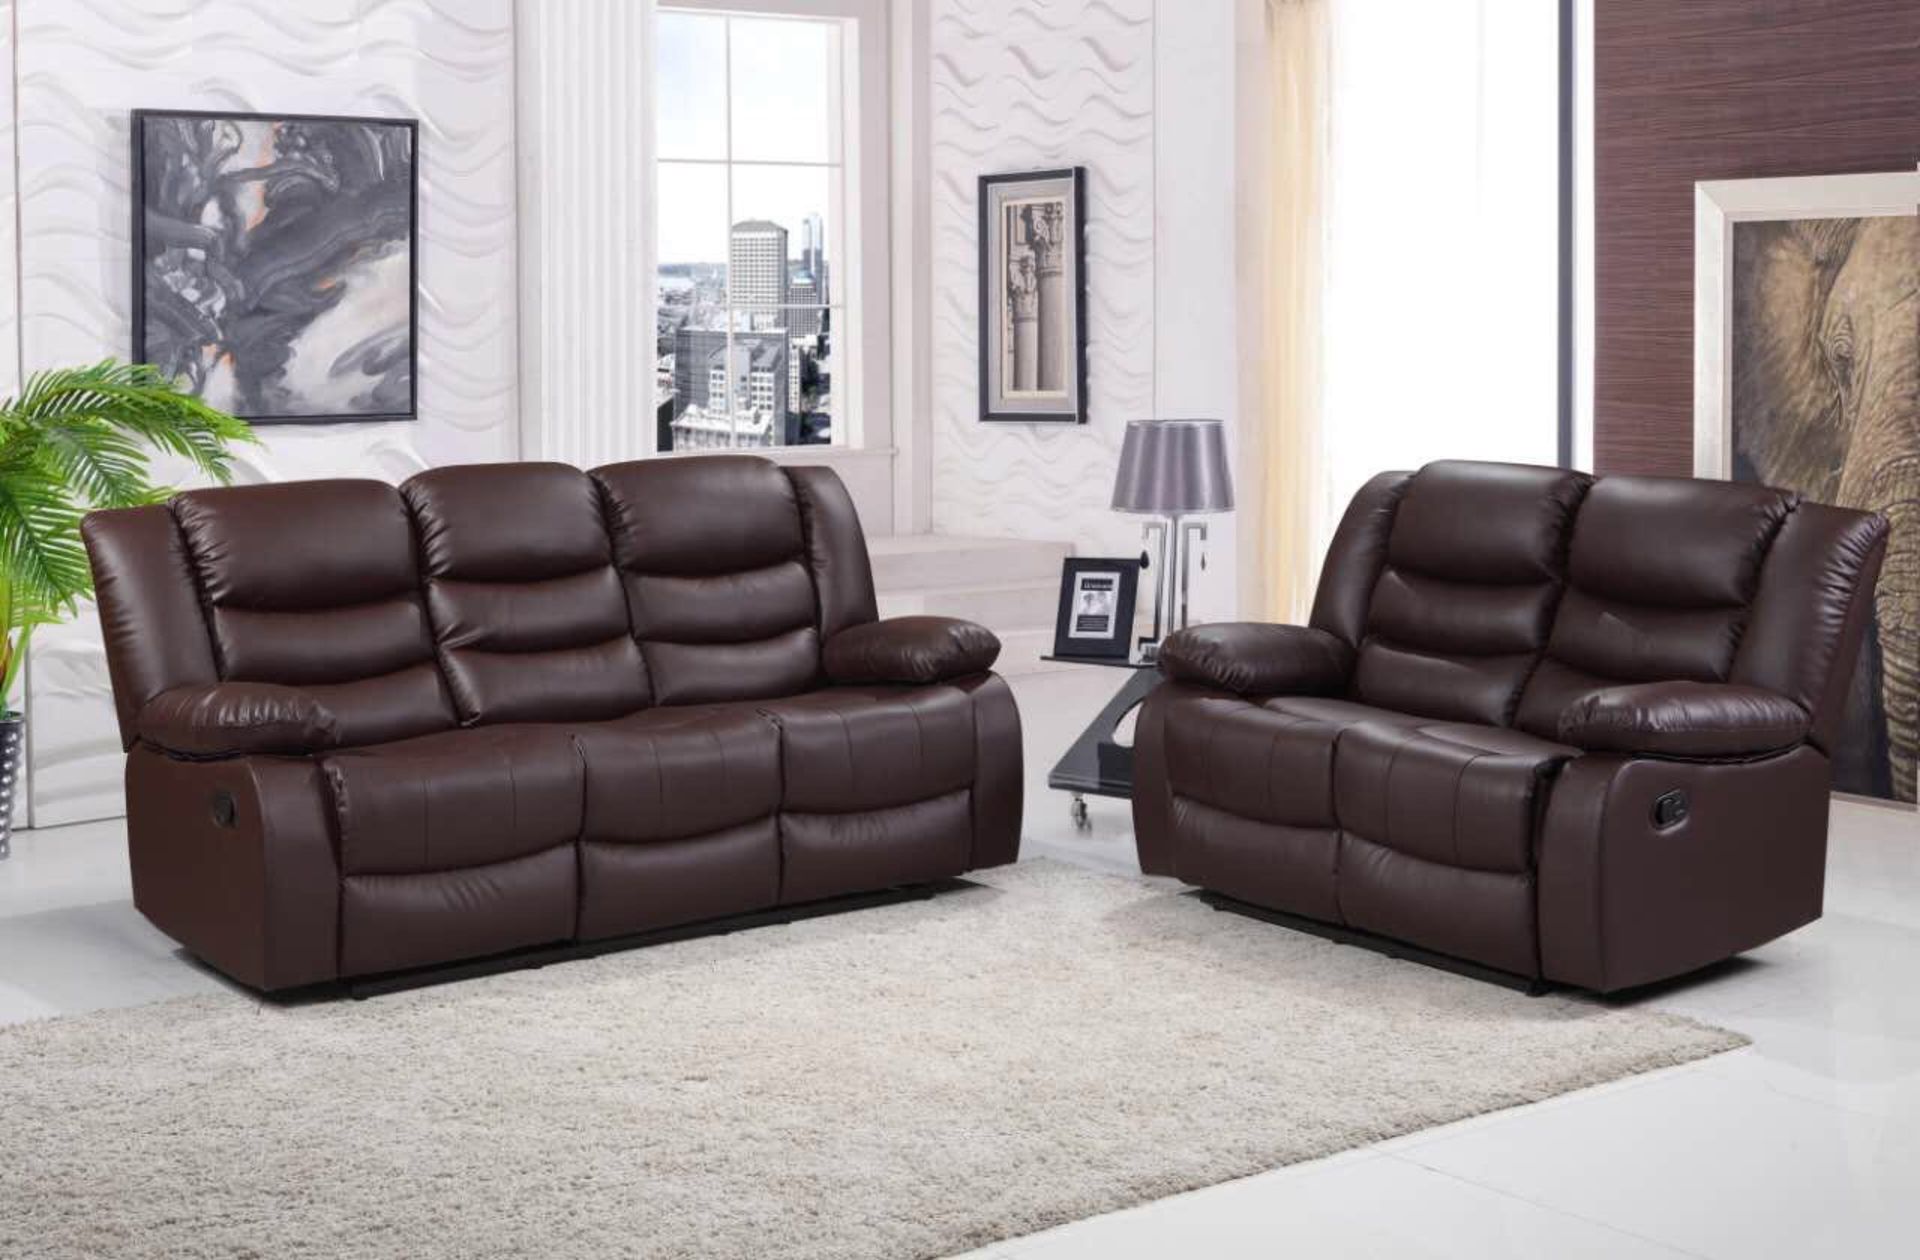 Brand New Boxed 3 Seater Plus 2 Seater Berlin Brown Leather Reclining Sofasæ